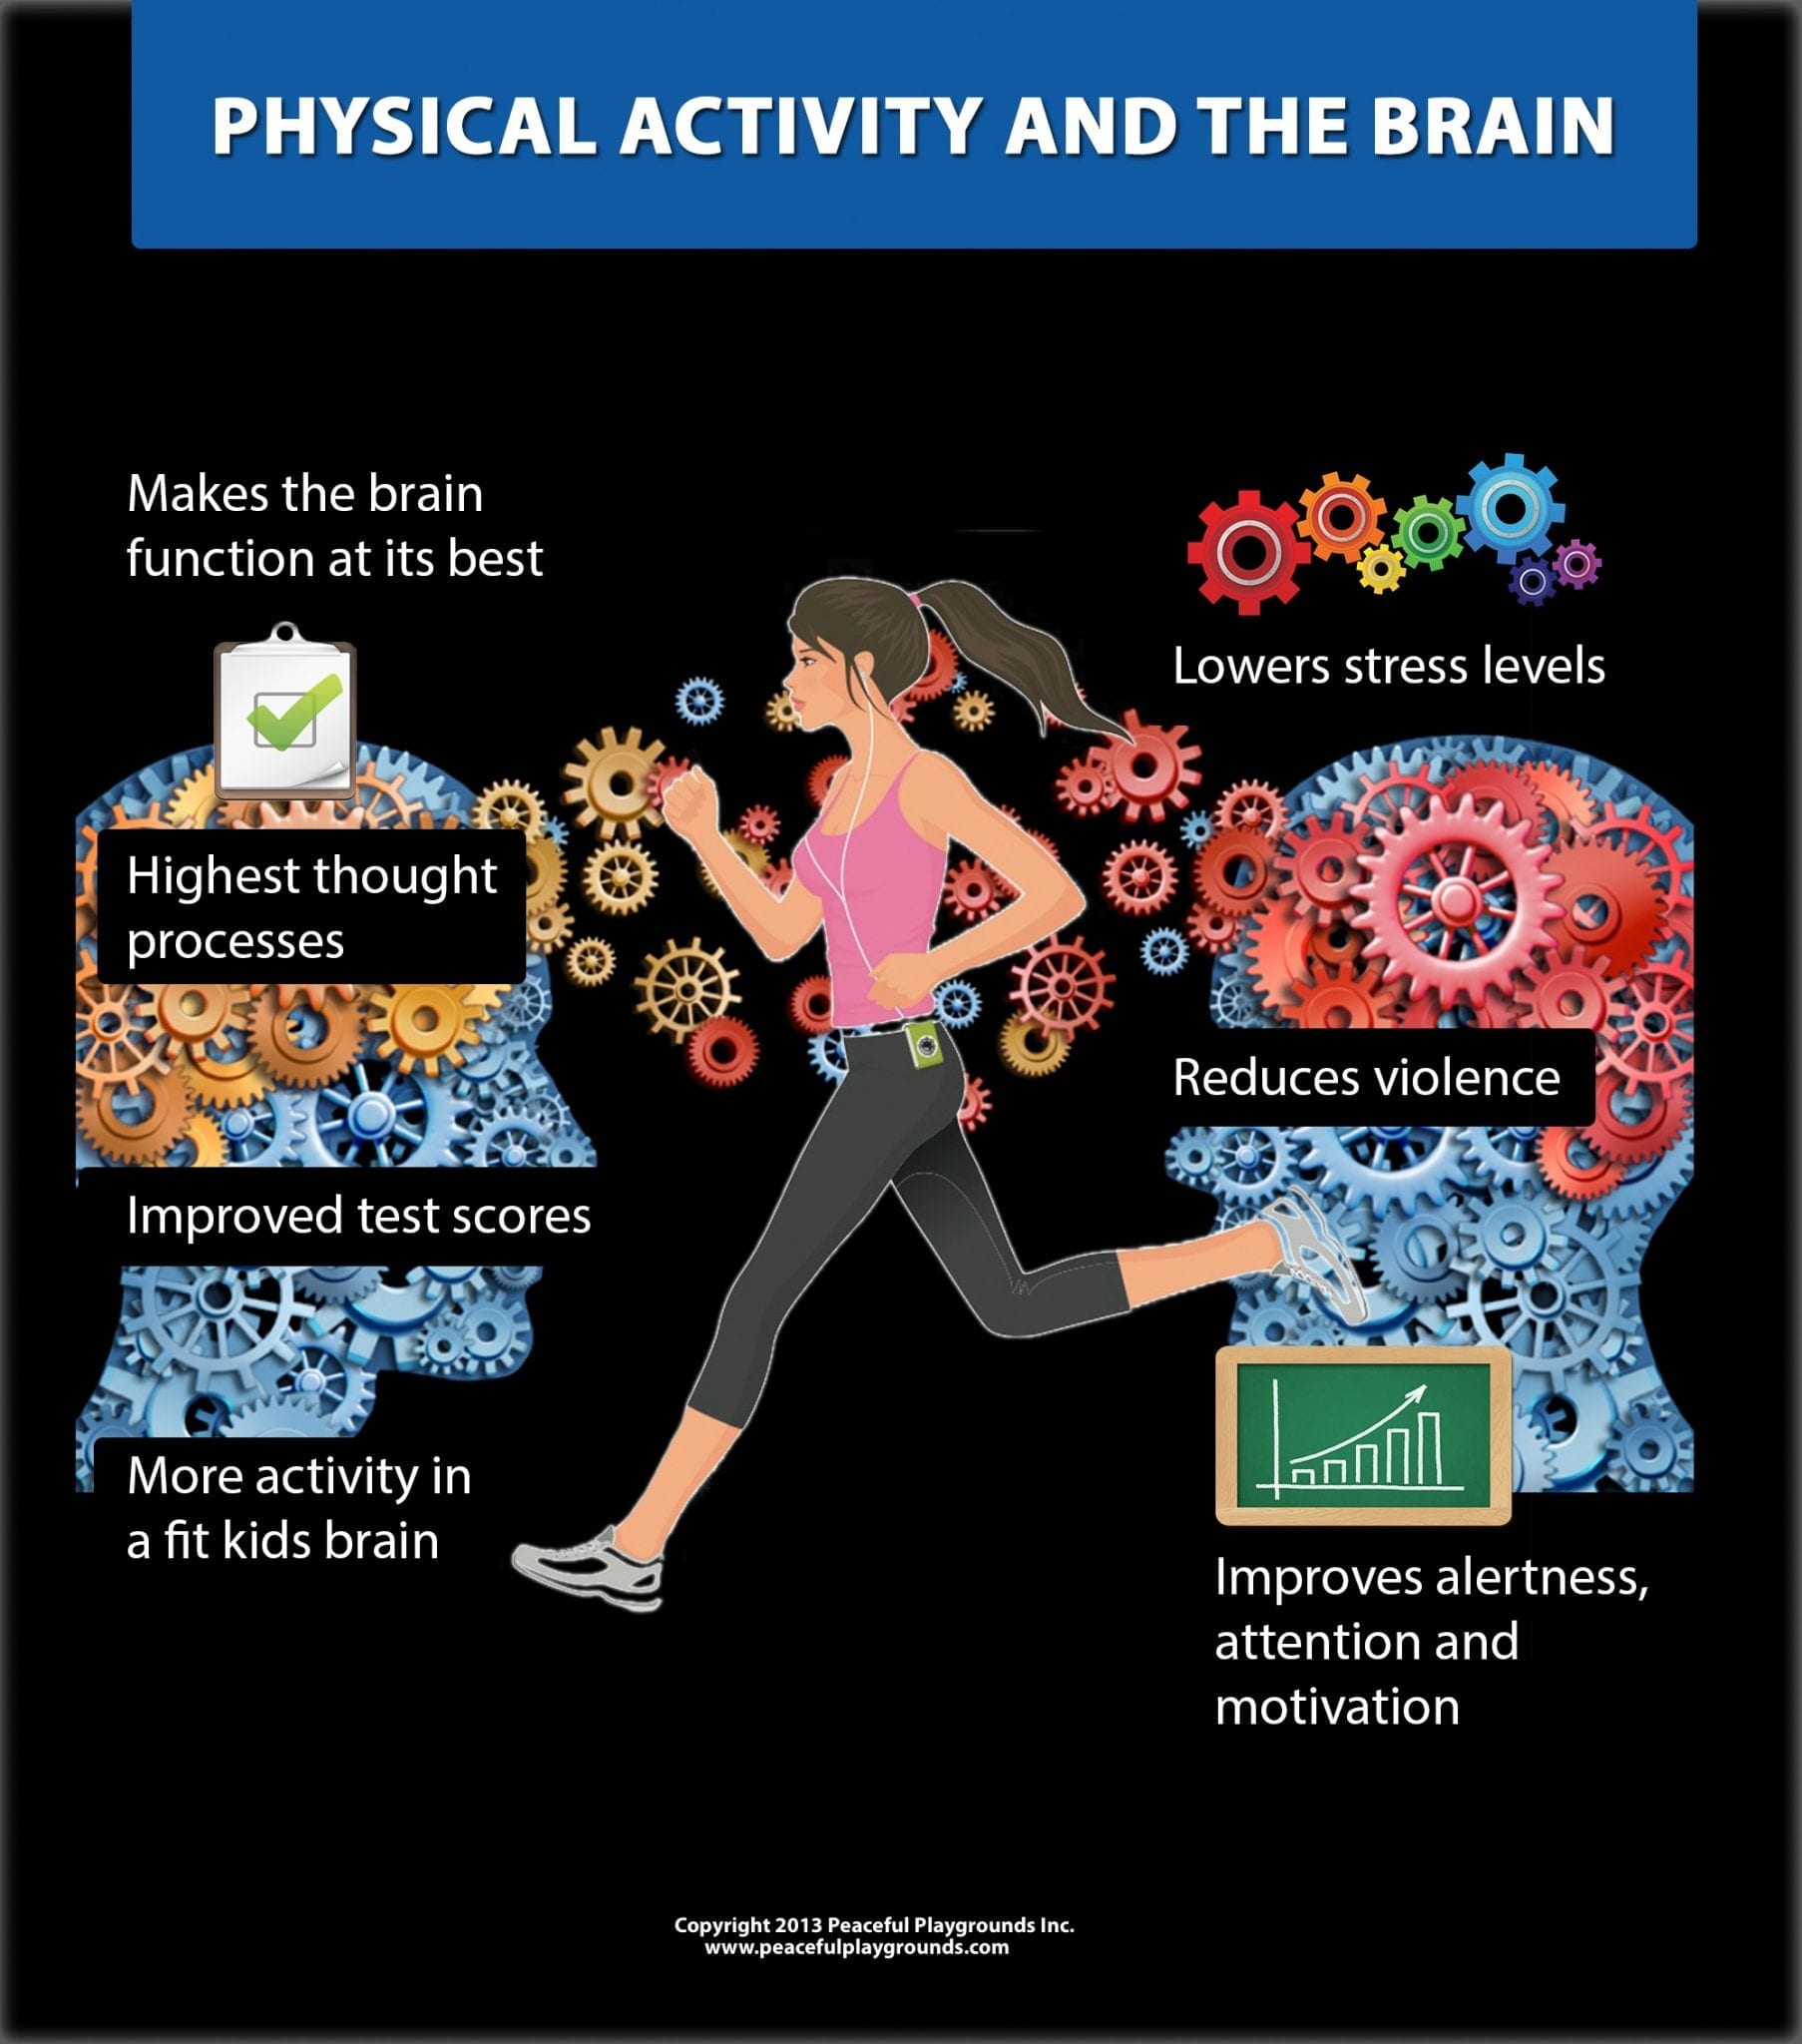 benefits of physical activity on mental health